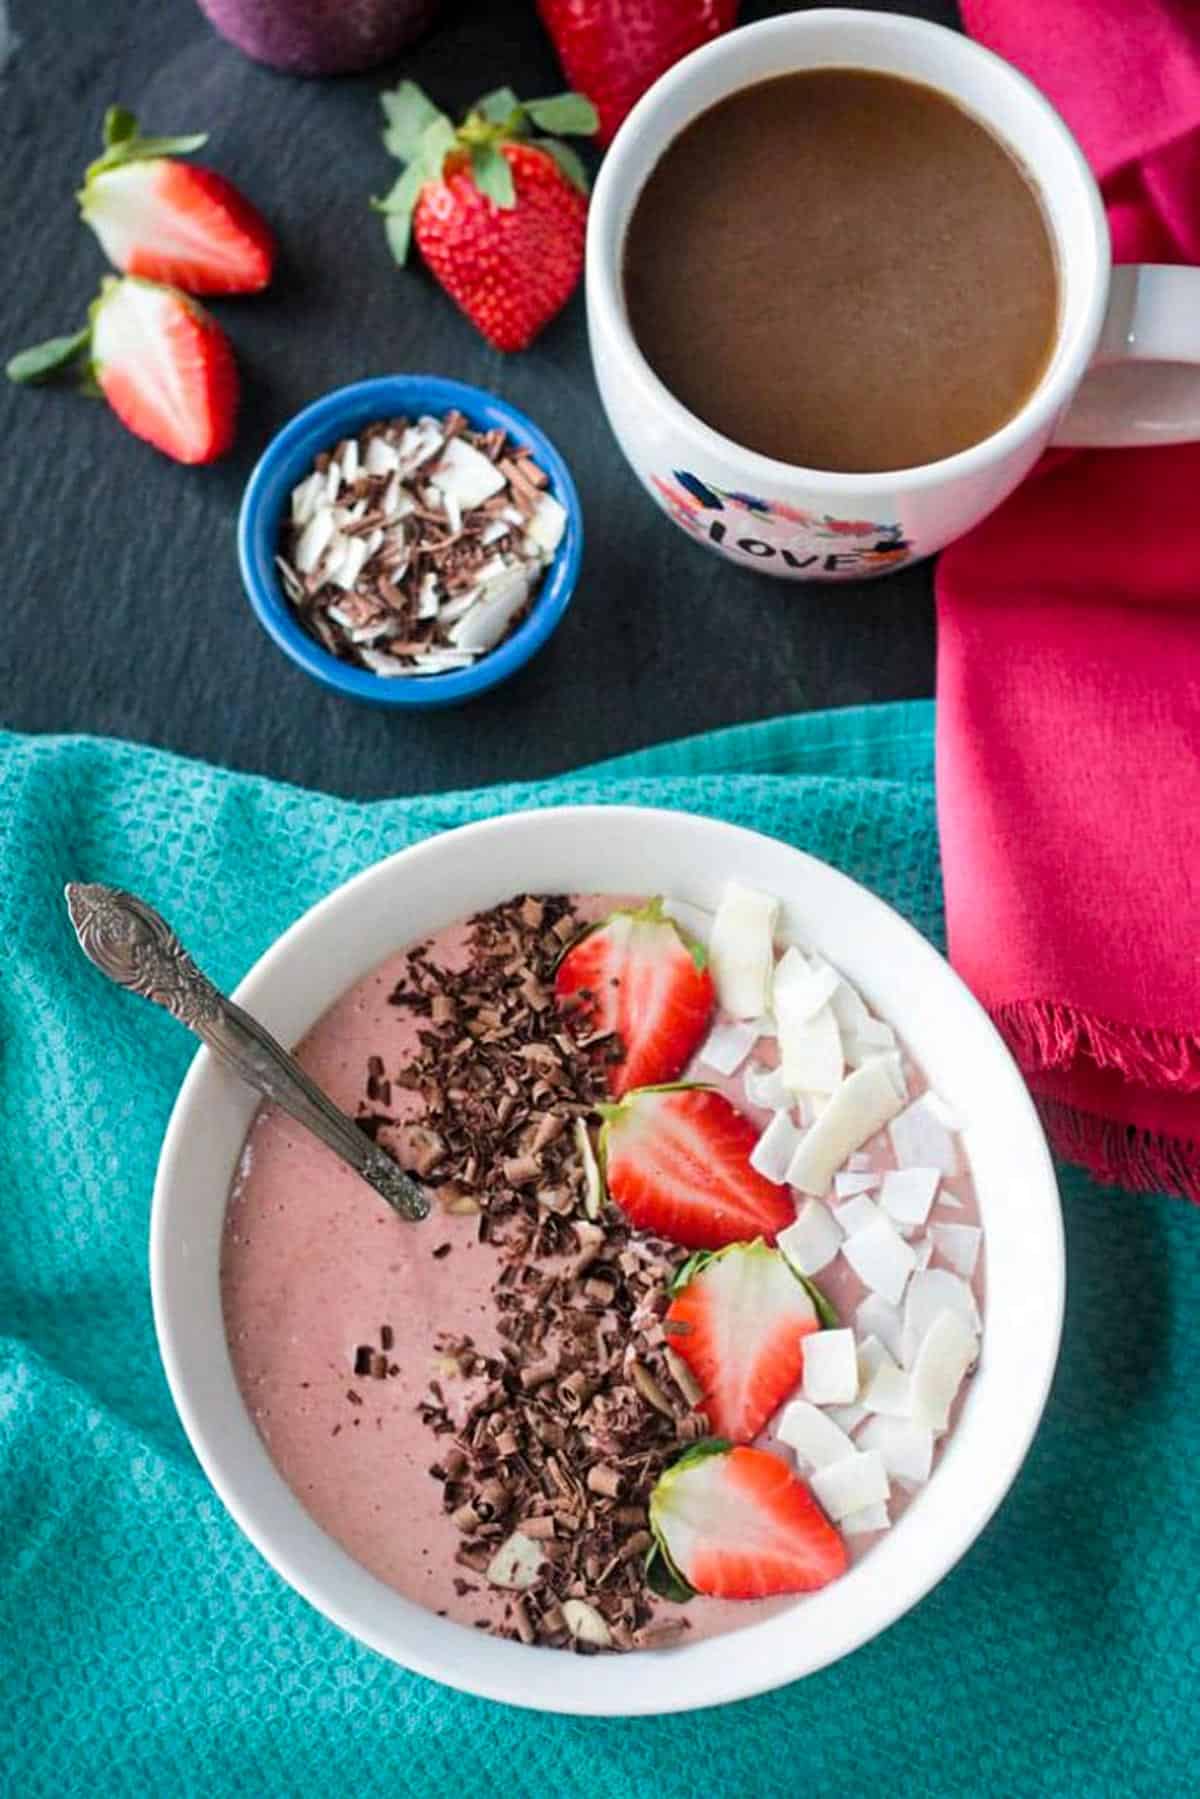 Strawberry smoothie bowl topped with sliced strawberries, coconut flakes, and chocolate shavings.